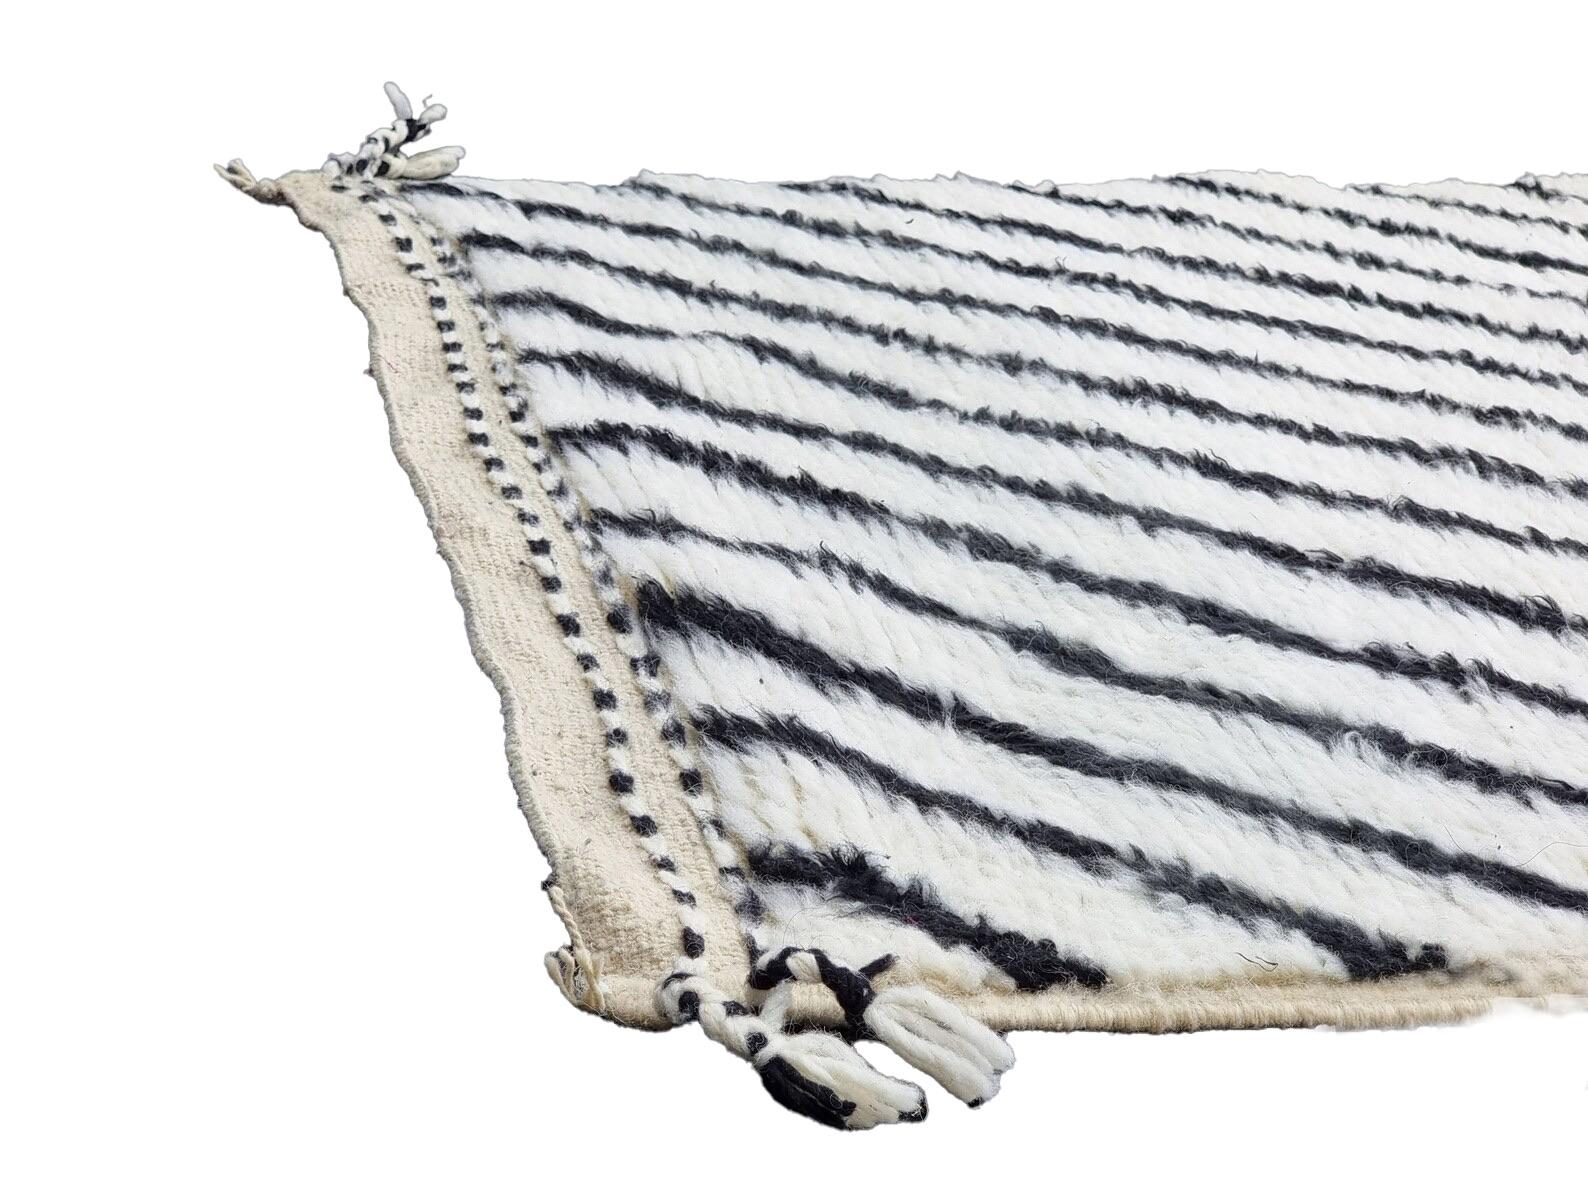 Moroccan Berber checkered and striped white and black wool runner rug. Handwoven by the north African Ben Ourian tribe. Black stripes set against a white background are associated with protection and balance in traditional Berber motifs. Hand woven